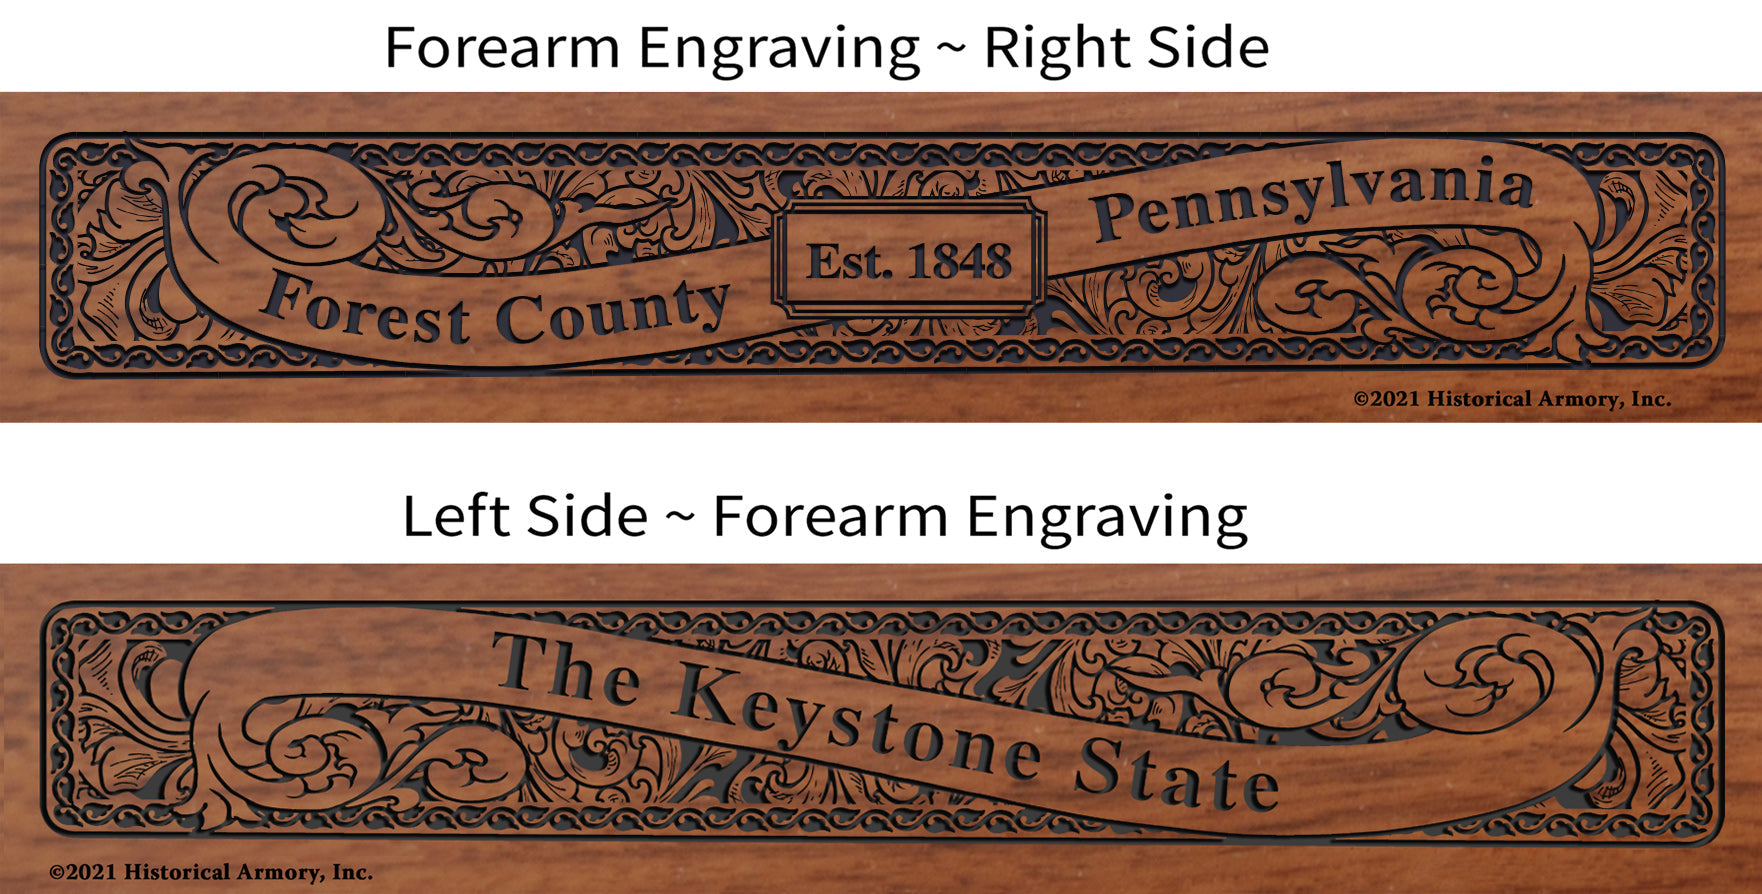 Forest County Pennsylvania Engraved Rifle Forearm